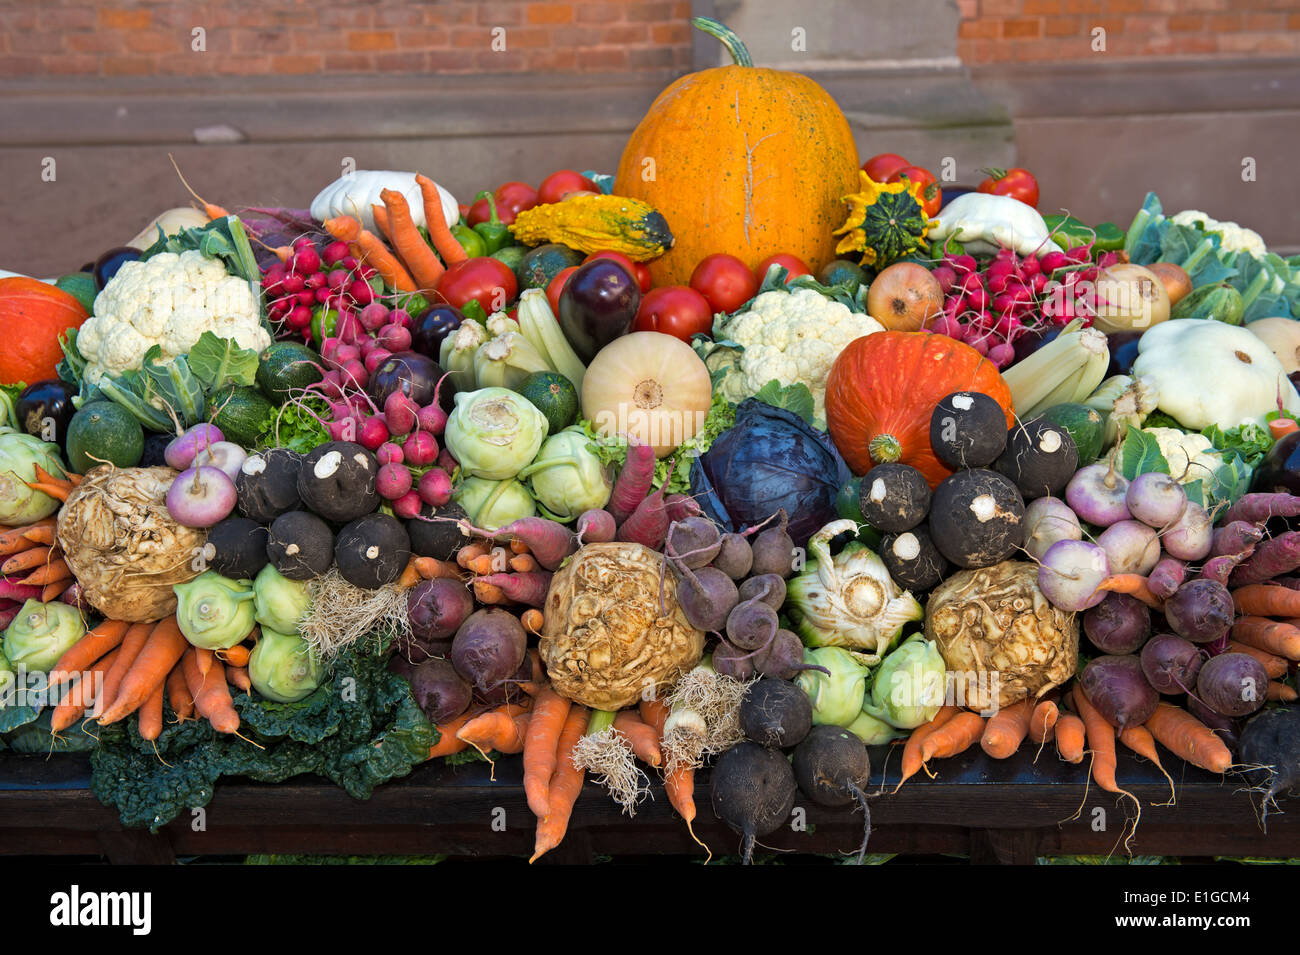 Colourful selection of a wide variety of vegetables at a market stand, Colmar, Alsace, France Stock Photo